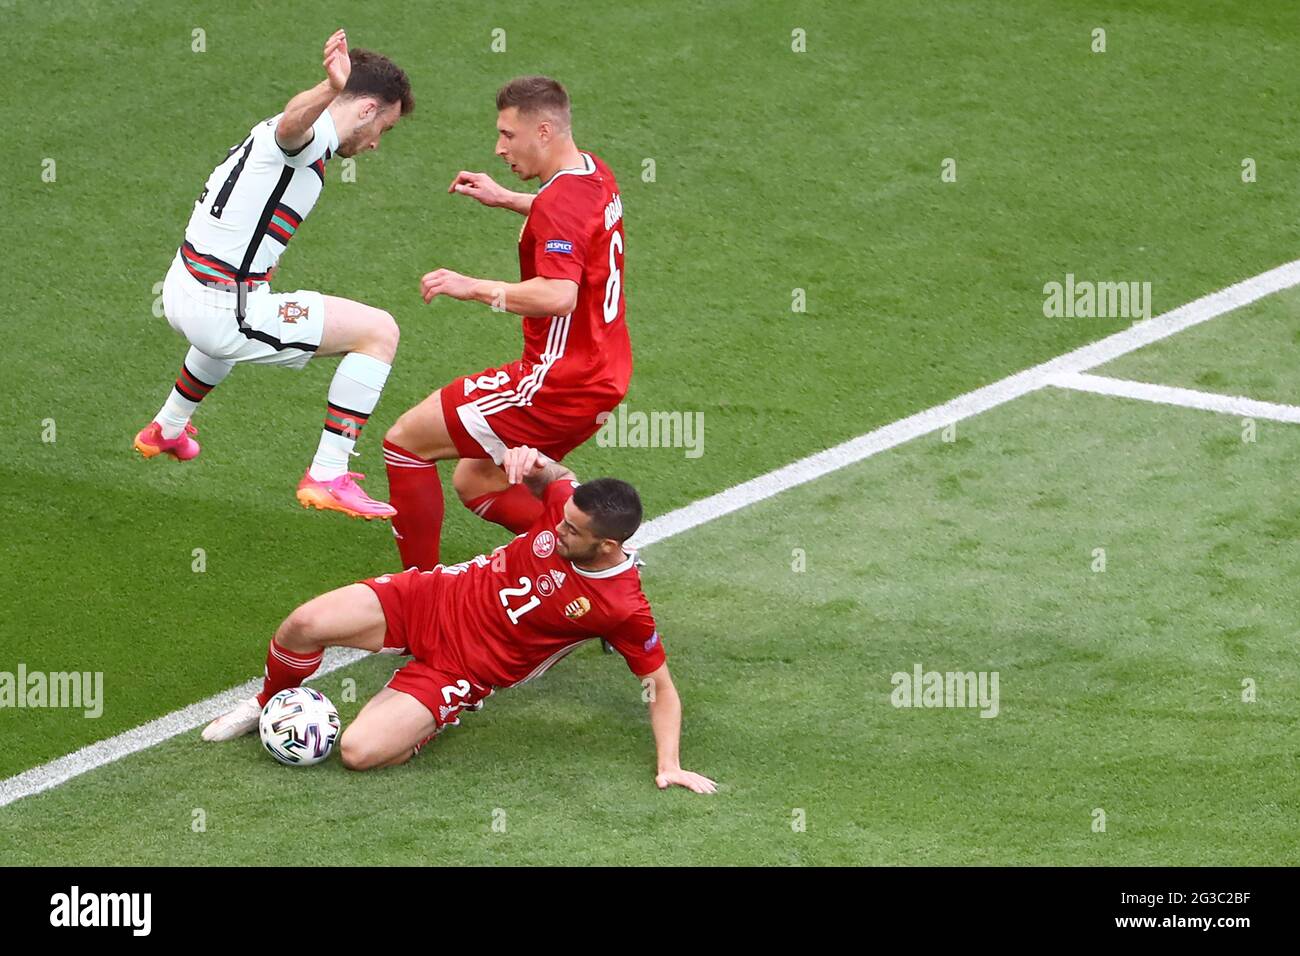 BUDAPEST, HUNGARY - JUNE 15: Portuguese player Dioga Jota (21) fights for the ball with two Hungarian players Willi Orbán (6) and Endre Botka (21) during the match at the UEFA Euro 2020 Championship Group F match between Hungary and Portugal on June 15, 2021 in Budapest, Hungary. (Photo by MB Media) Stock Photo